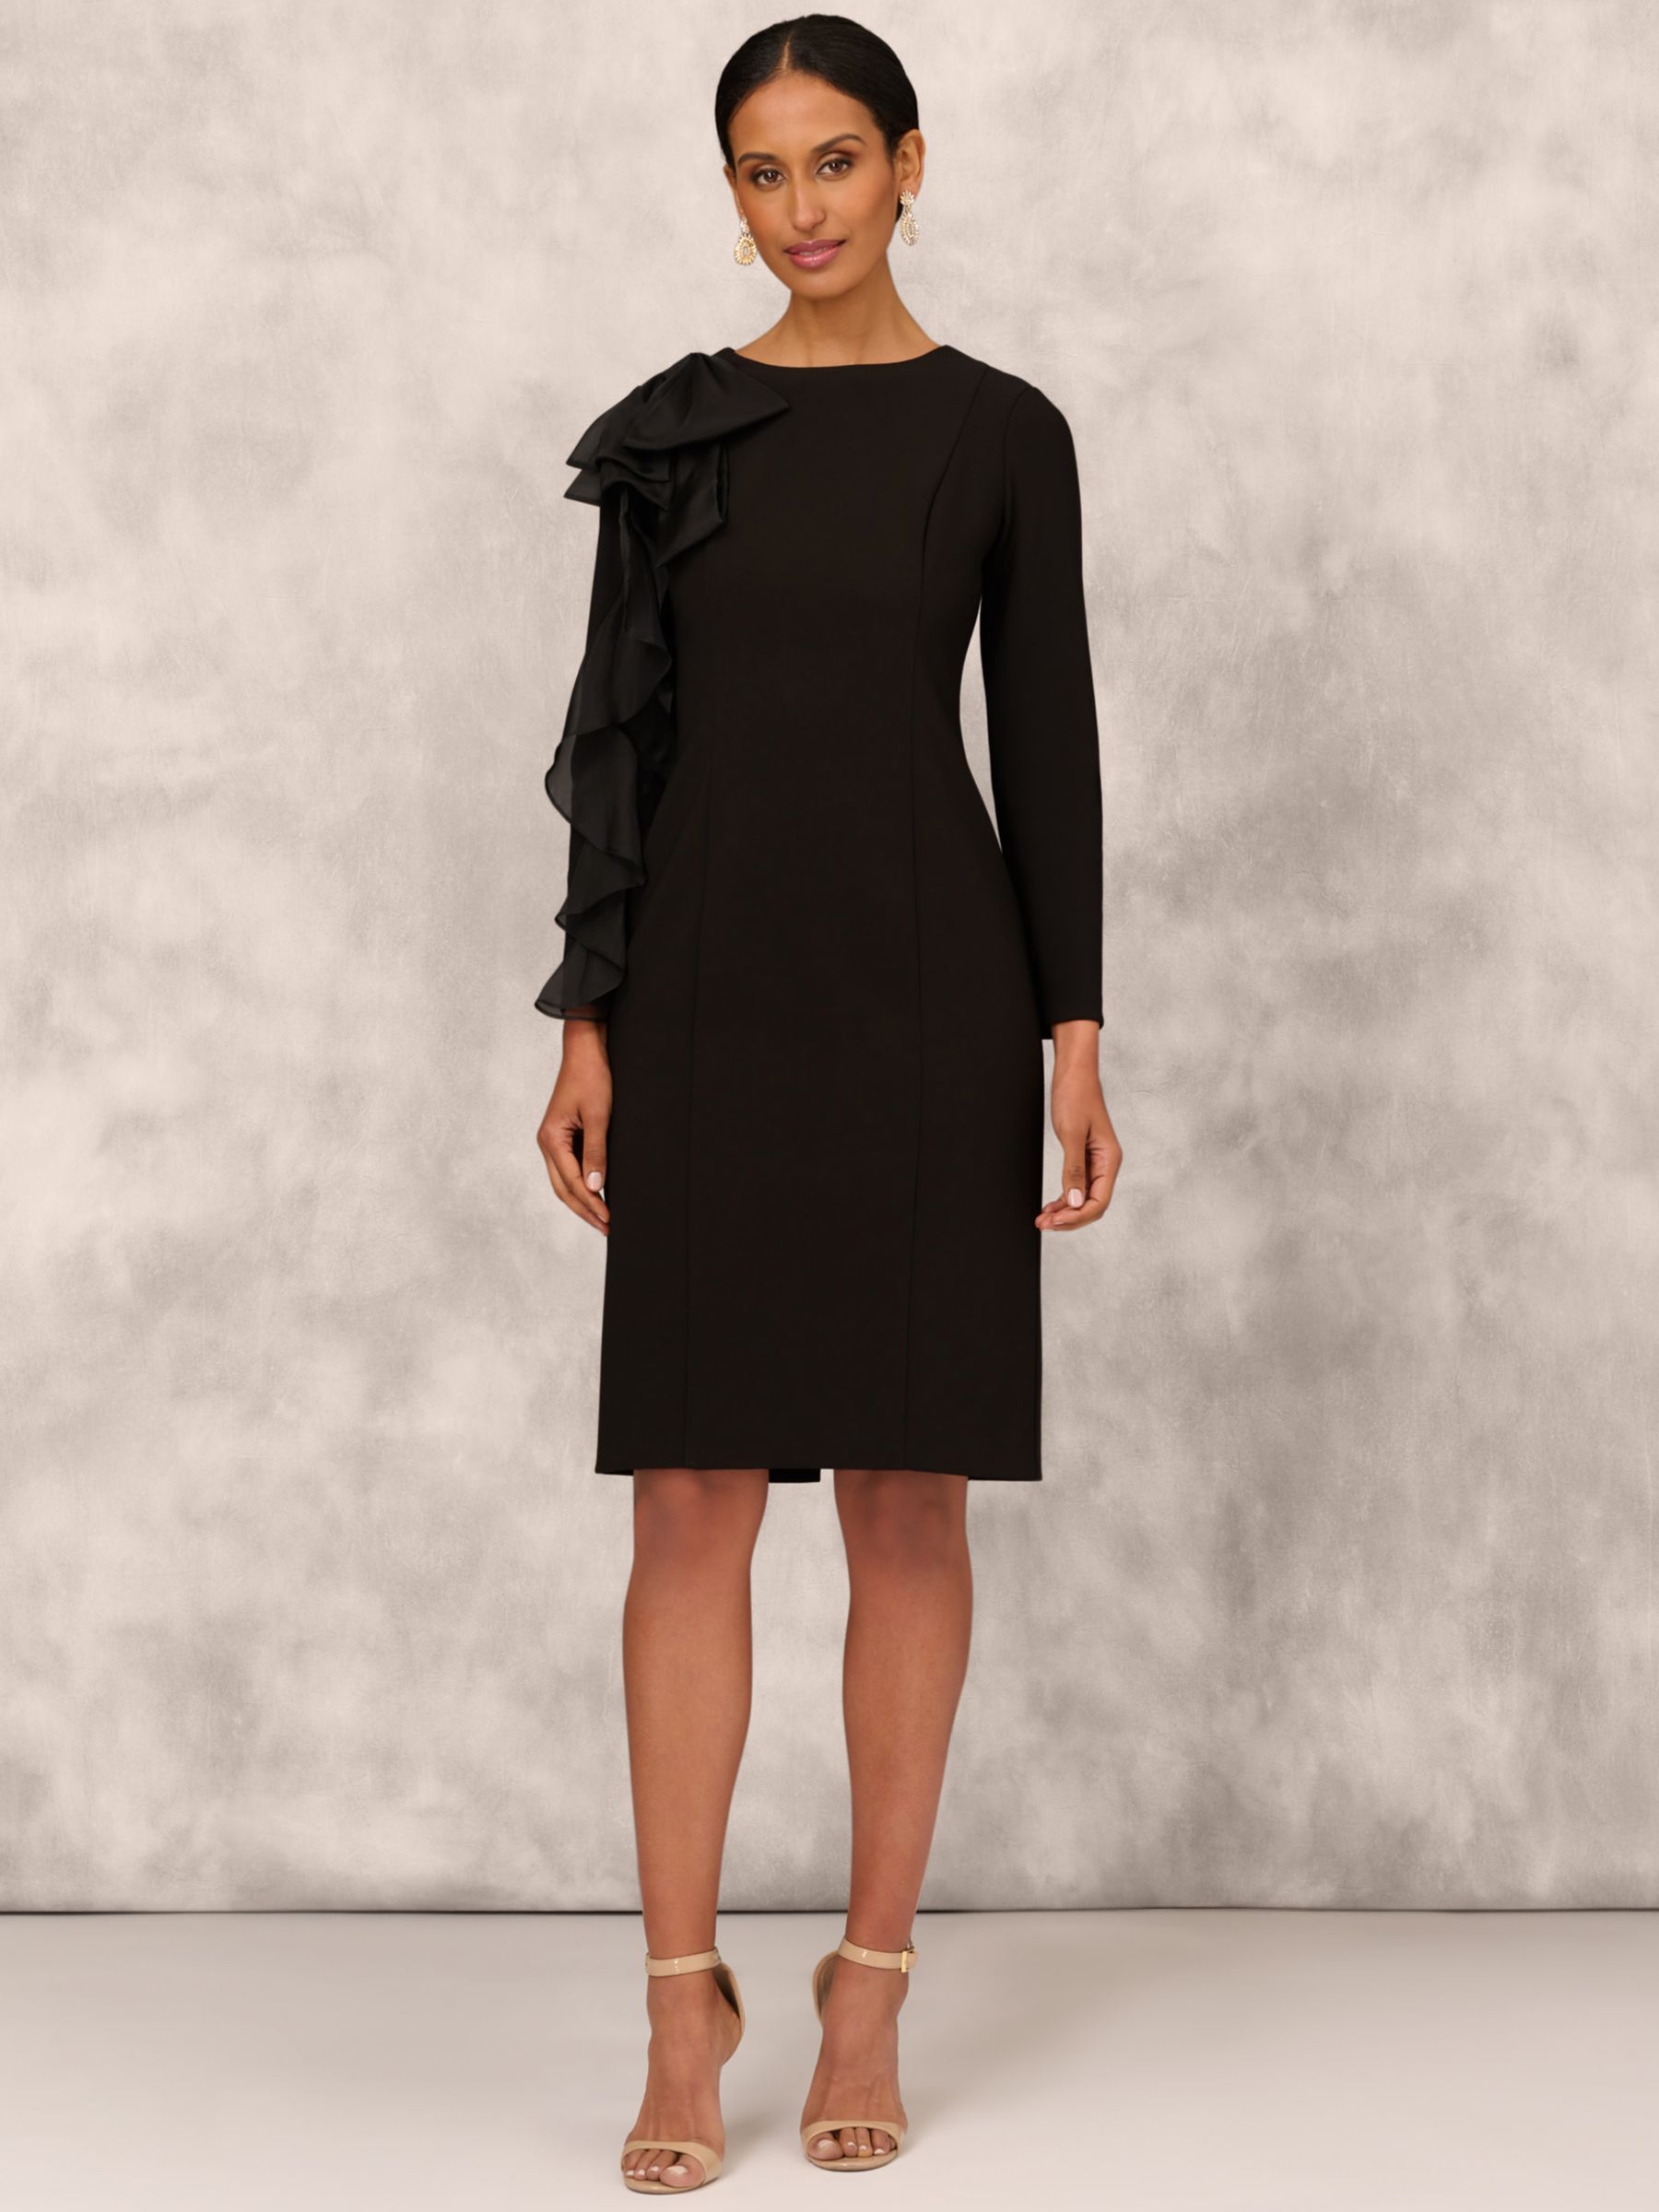 Buy Adrianna Papell Aidan Mattox by Adrianna Papell Midi Cocktail Dress, Black Online at johnlewis.com